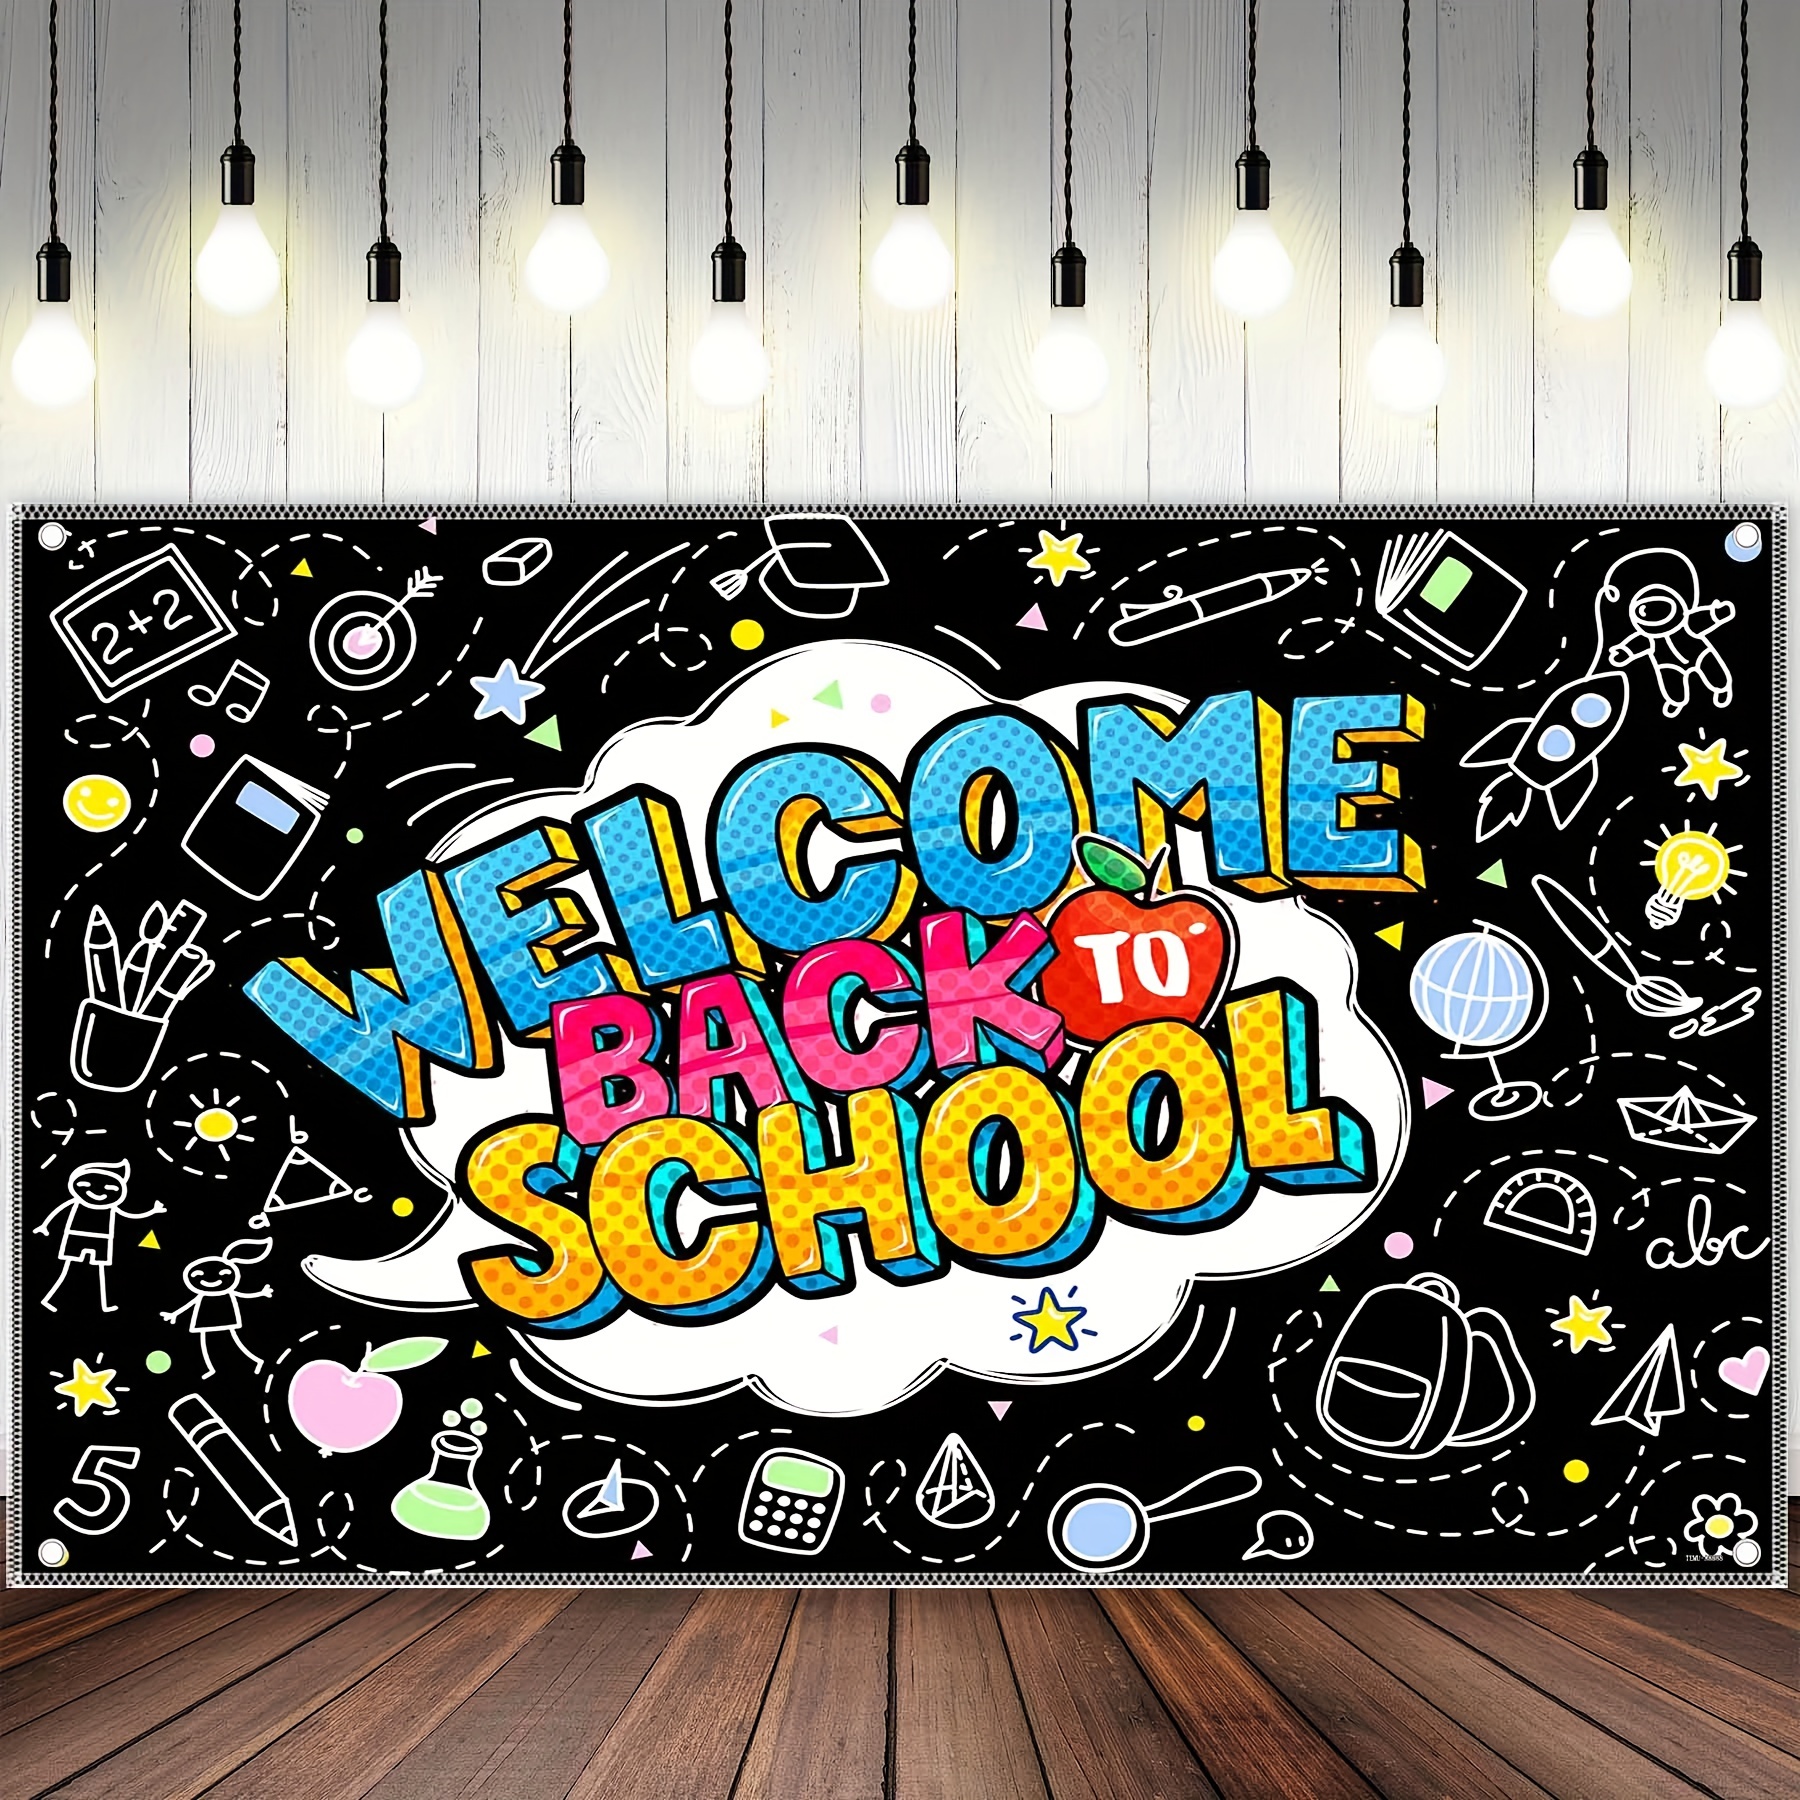 AWERT 5x3ft School Season Backdrop Welcome Back to School Chalk Board Stationery Background for Photography Kids First Day of School Classroom Offi - 3